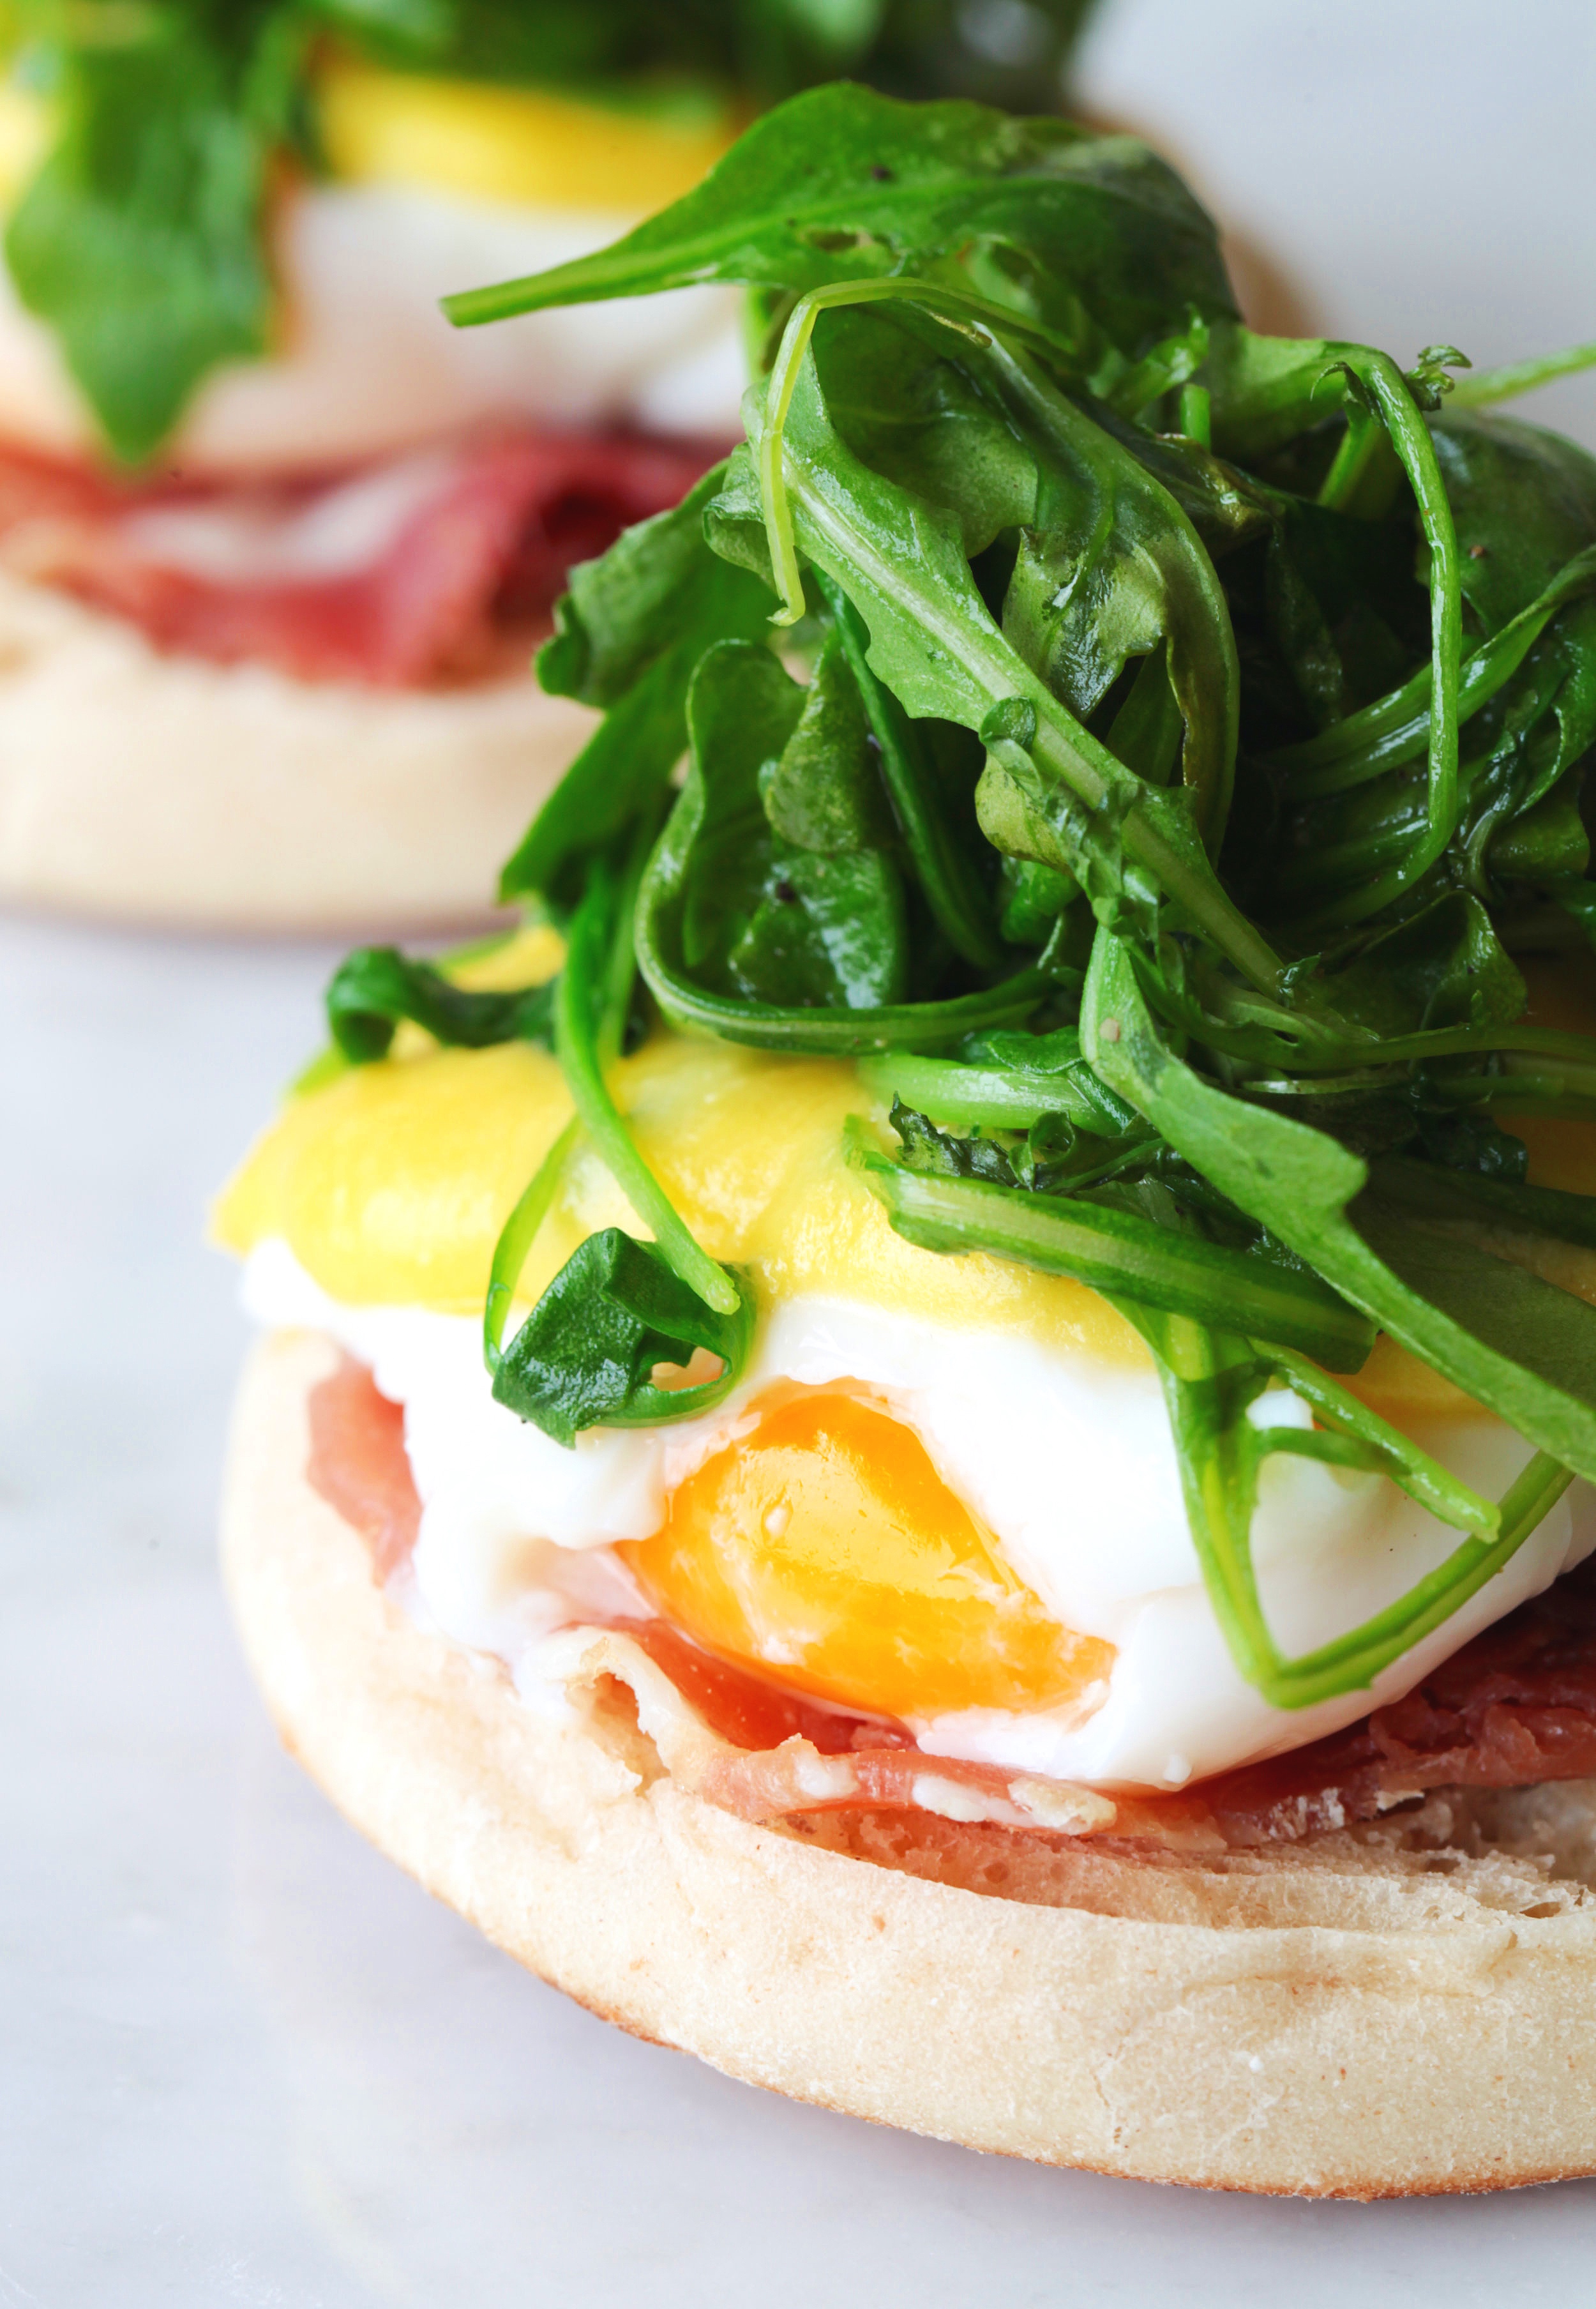 Breakfast sandwich with prosciutto, arugula and sunny side up egg on English muffin